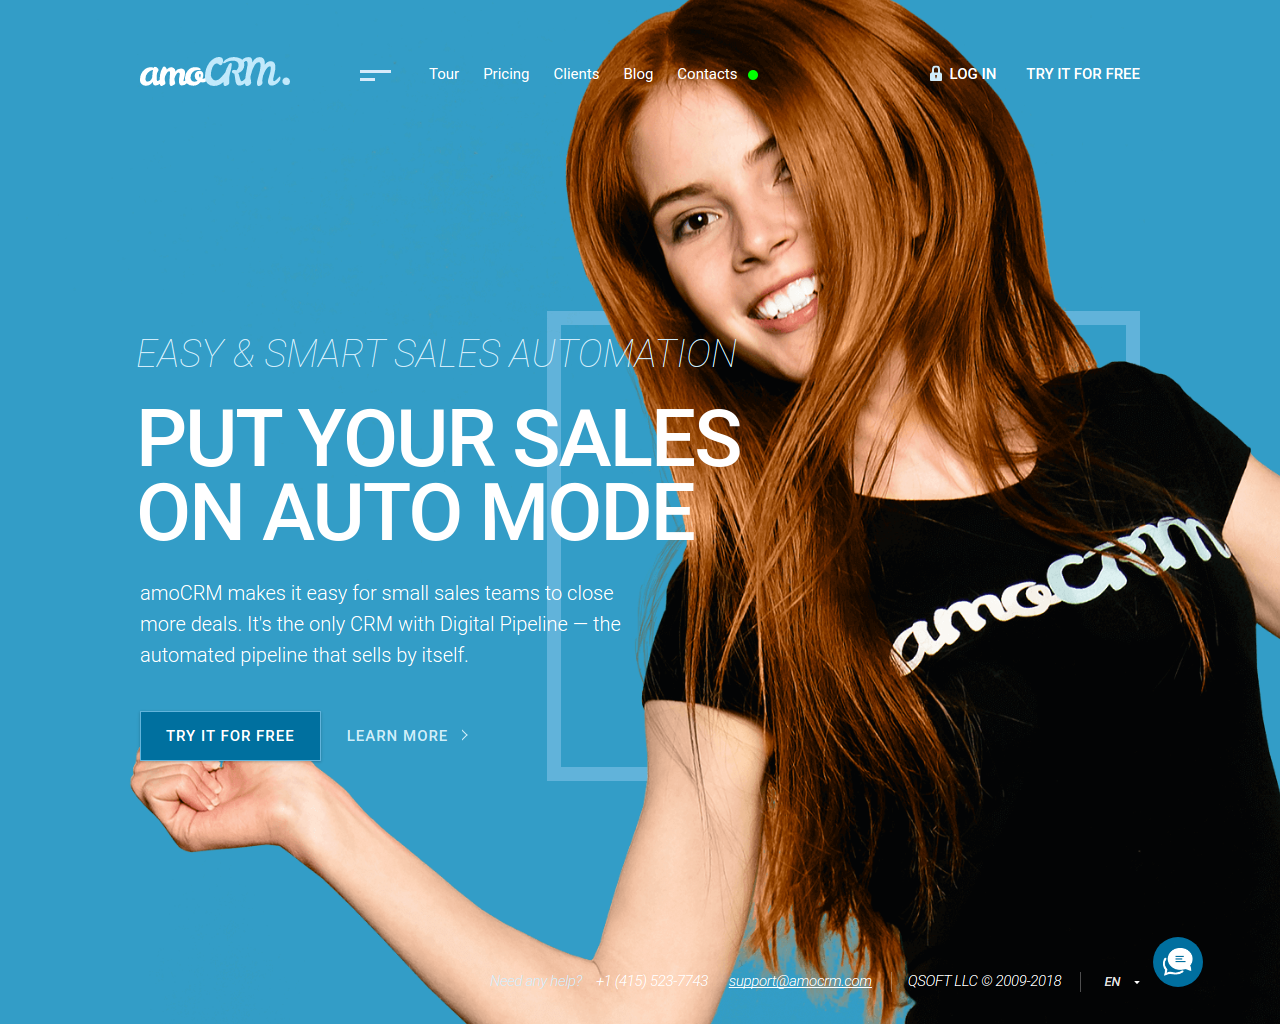 Cover photo of amoCRM